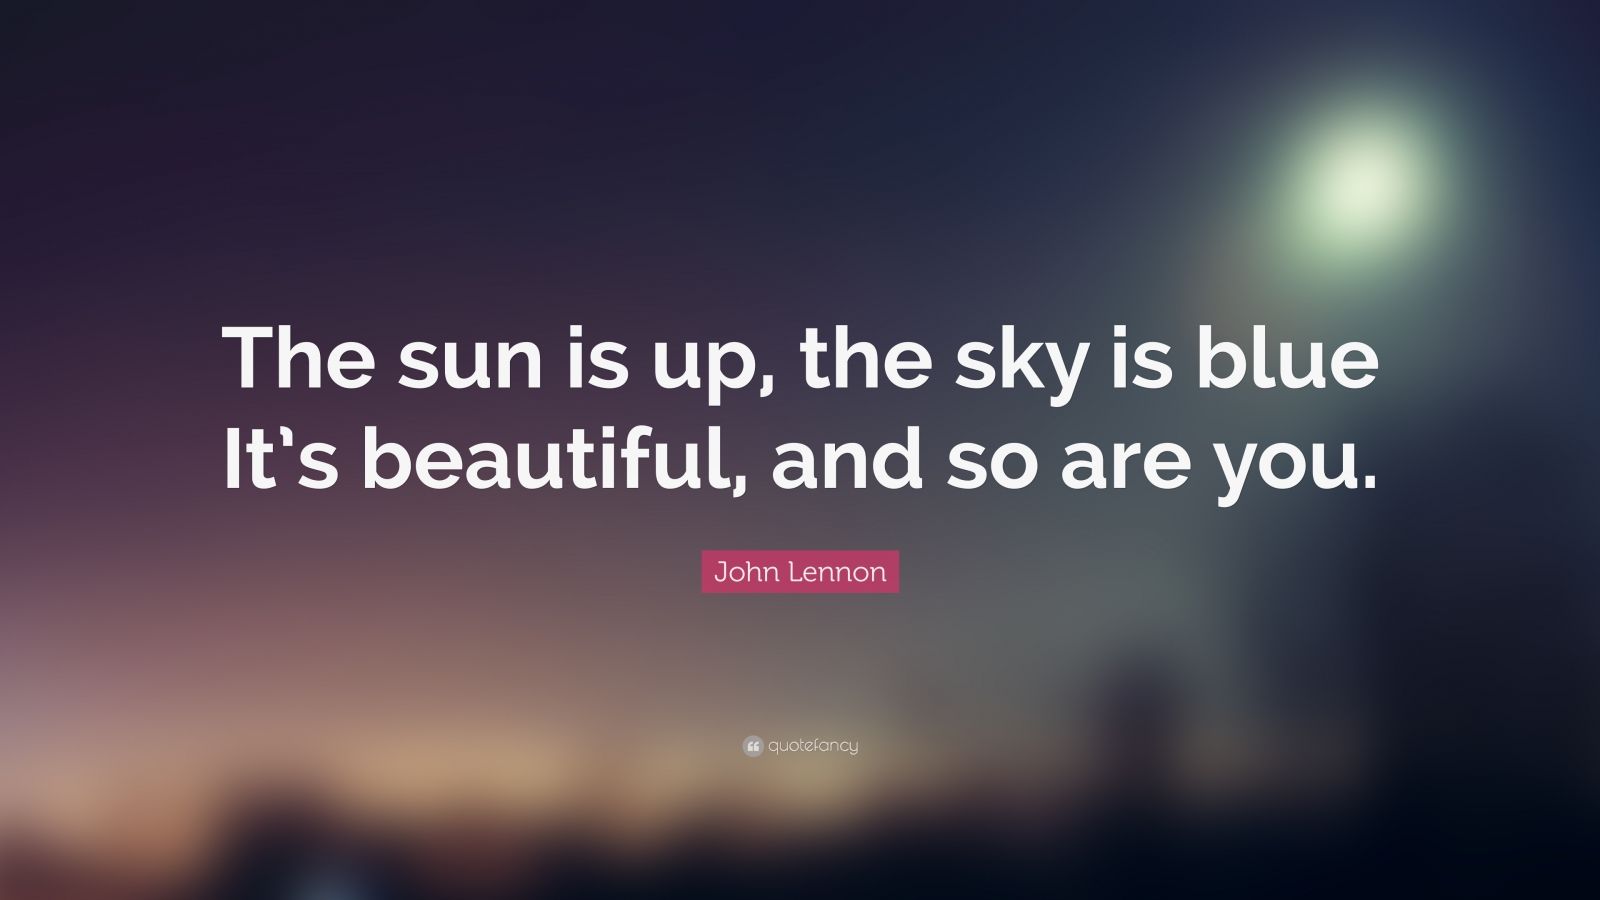 John Lennon Quote: “The sun is up, the sky is blue It’s beautiful, and ...